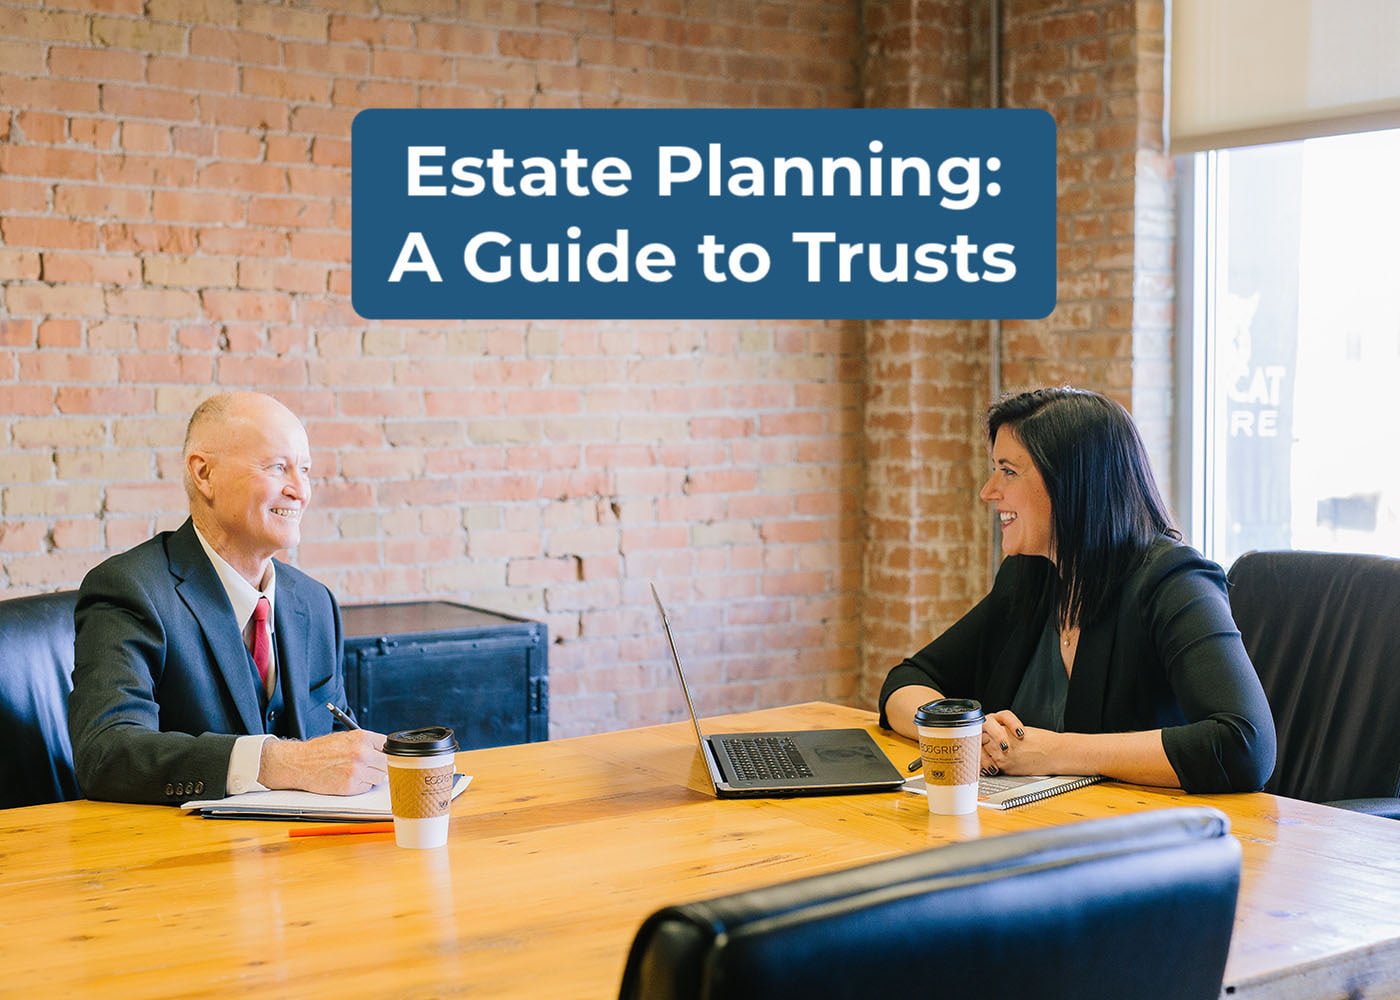 A Guide to Trusts for Estate Planning